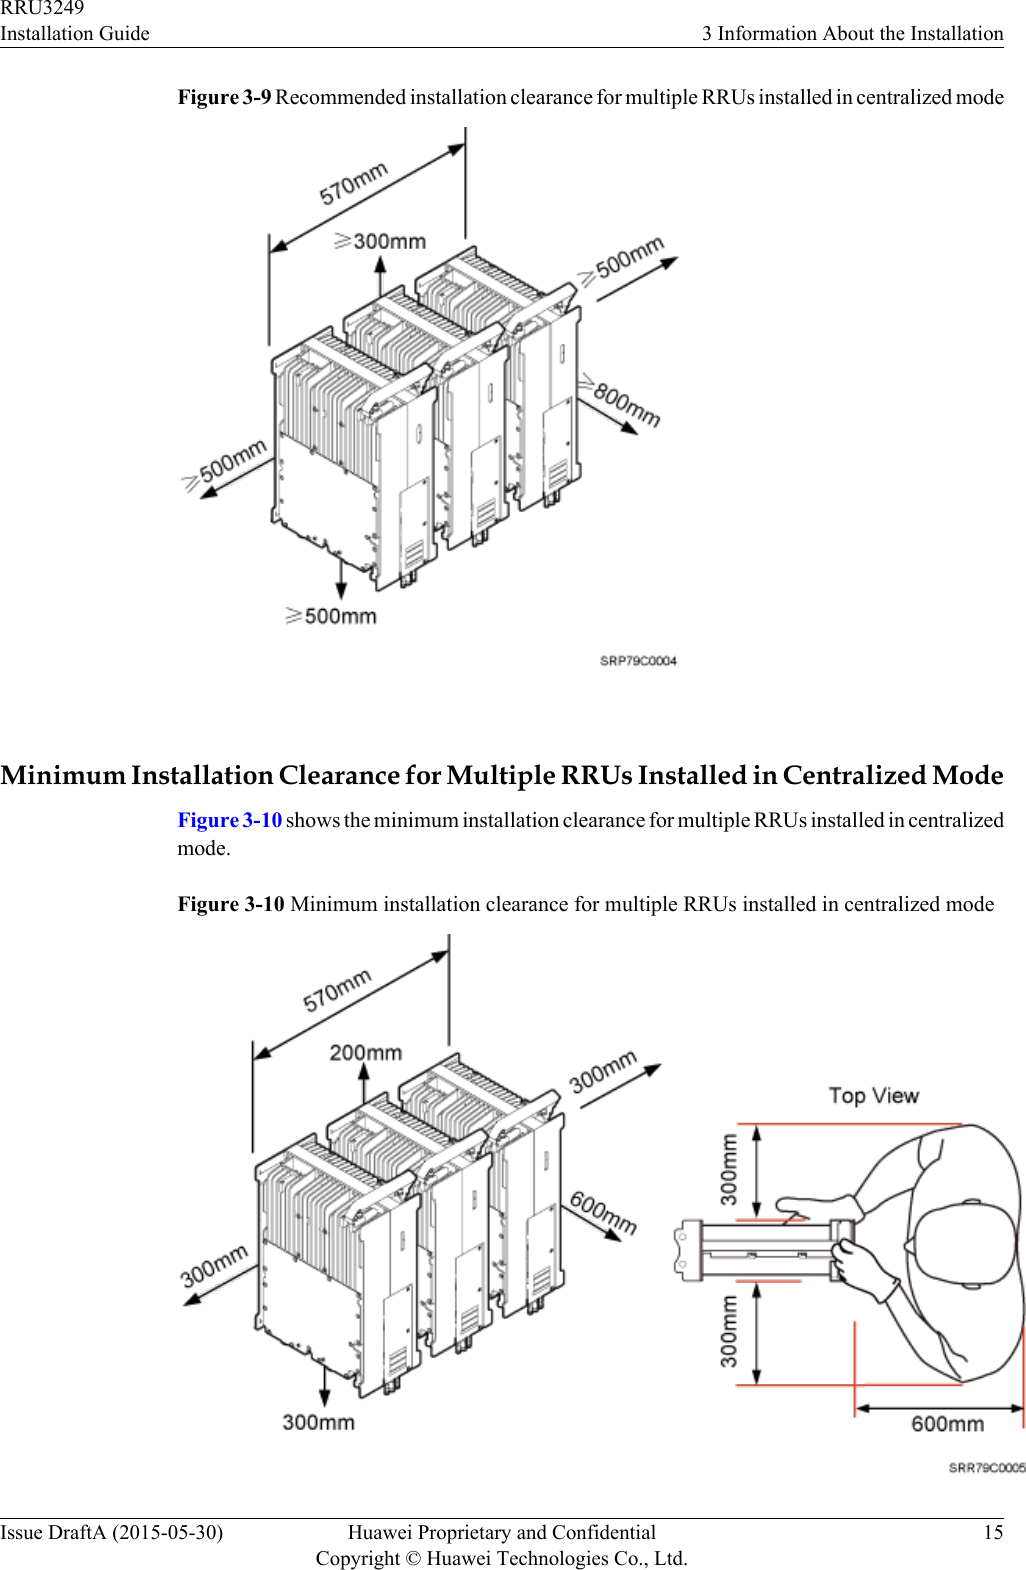 Figure 3-9 Recommended installation clearance for multiple RRUs installed in centralized mode Minimum Installation Clearance for Multiple RRUs Installed in Centralized ModeFigure 3-10 shows the minimum installation clearance for multiple RRUs installed in centralizedmode.Figure 3-10 Minimum installation clearance for multiple RRUs installed in centralized modeRRU3249Installation Guide 3 Information About the InstallationIssue DraftA (2015-05-30) Huawei Proprietary and ConfidentialCopyright © Huawei Technologies Co., Ltd.15